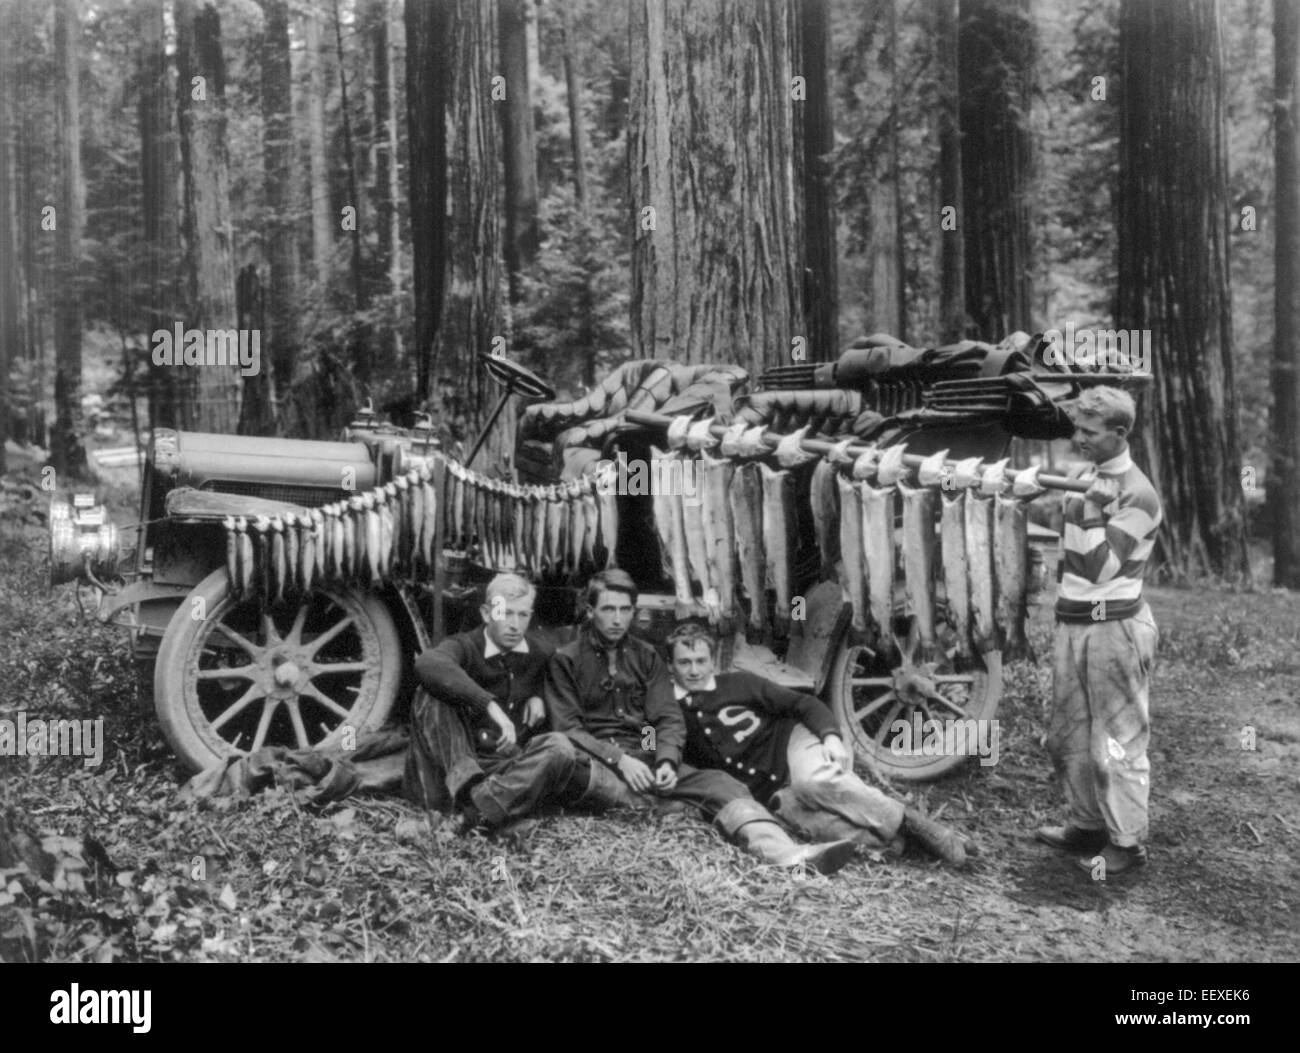 A Day's Catch at Big Lagoon - 4 young men with a large catch of trout, which are displayed in front of automobile, 1908. Stock Photo